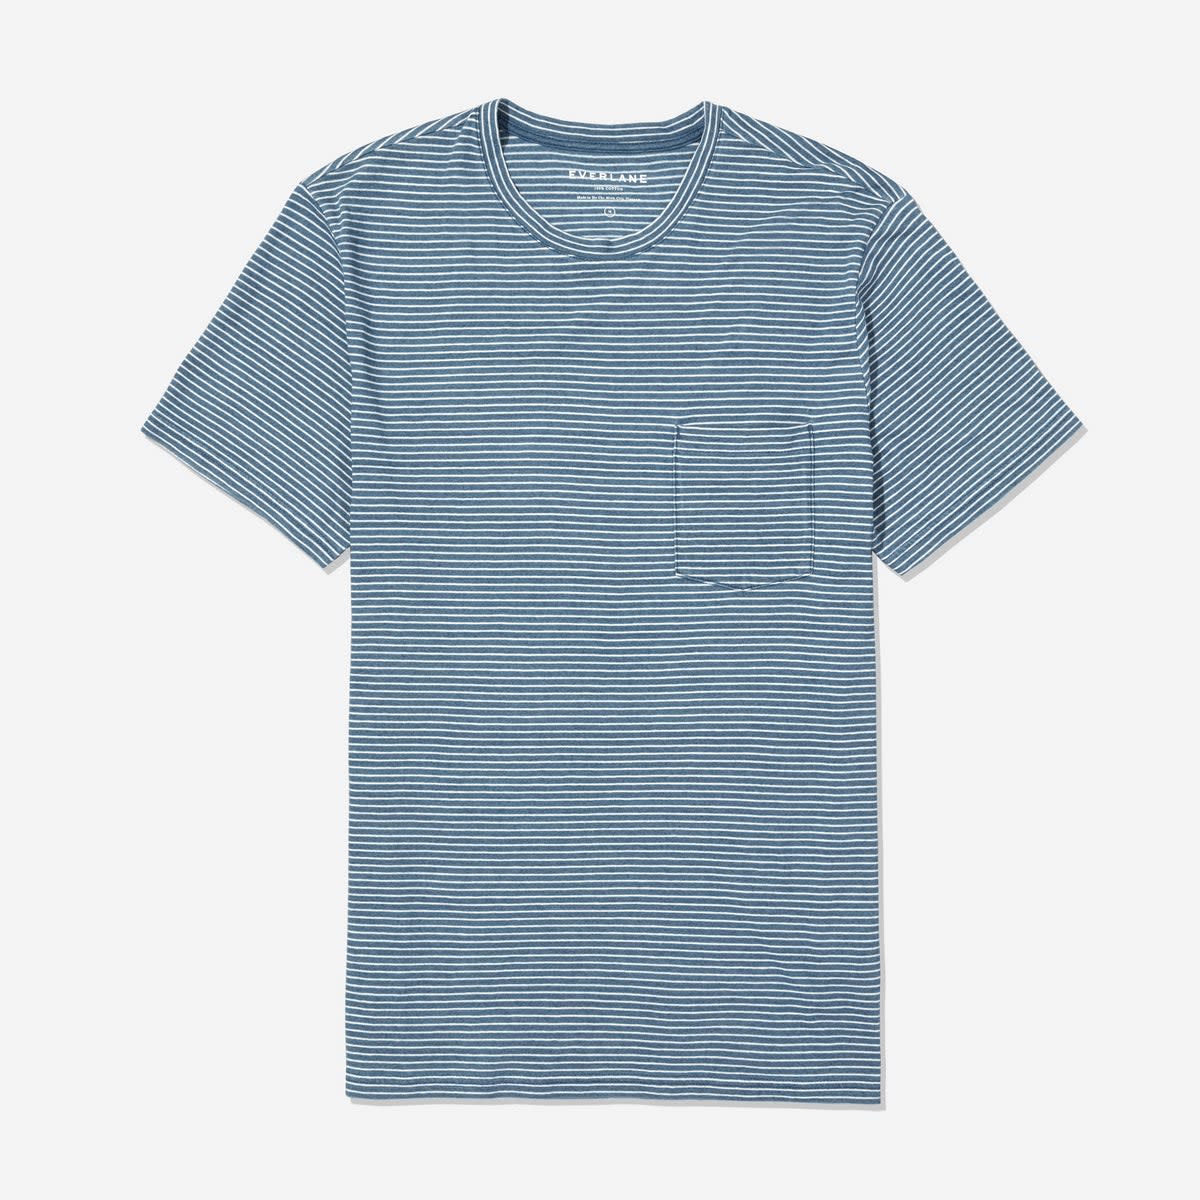 Embrace the Indigo With This Super Cool Pocket Tee - Airows